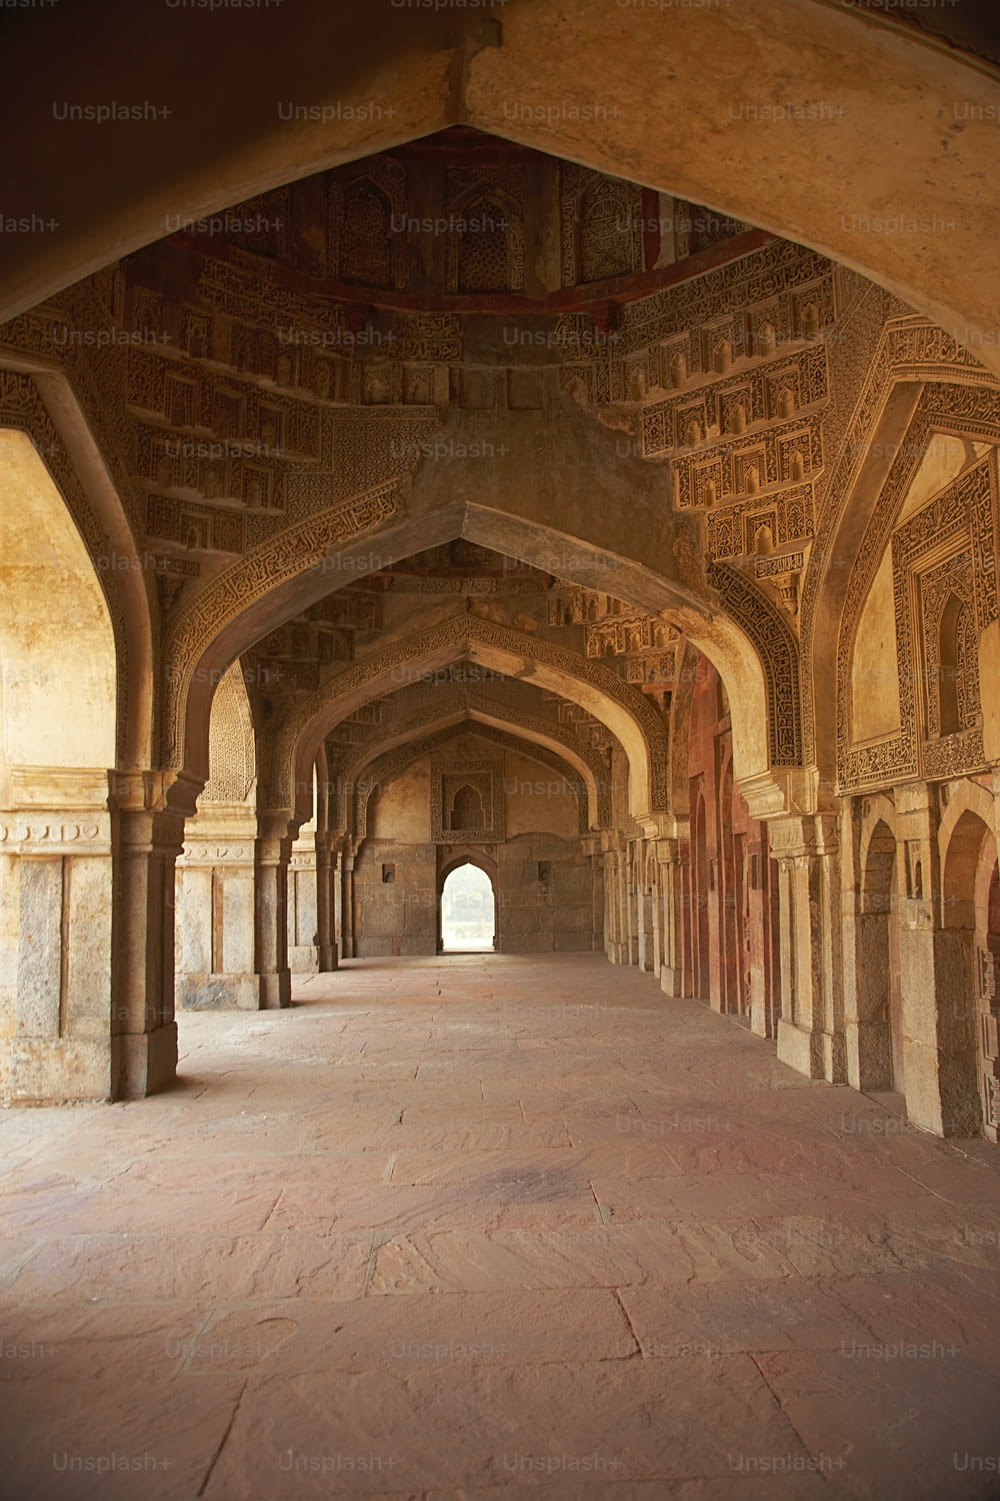 A photo from Amber Fort in Agra, India